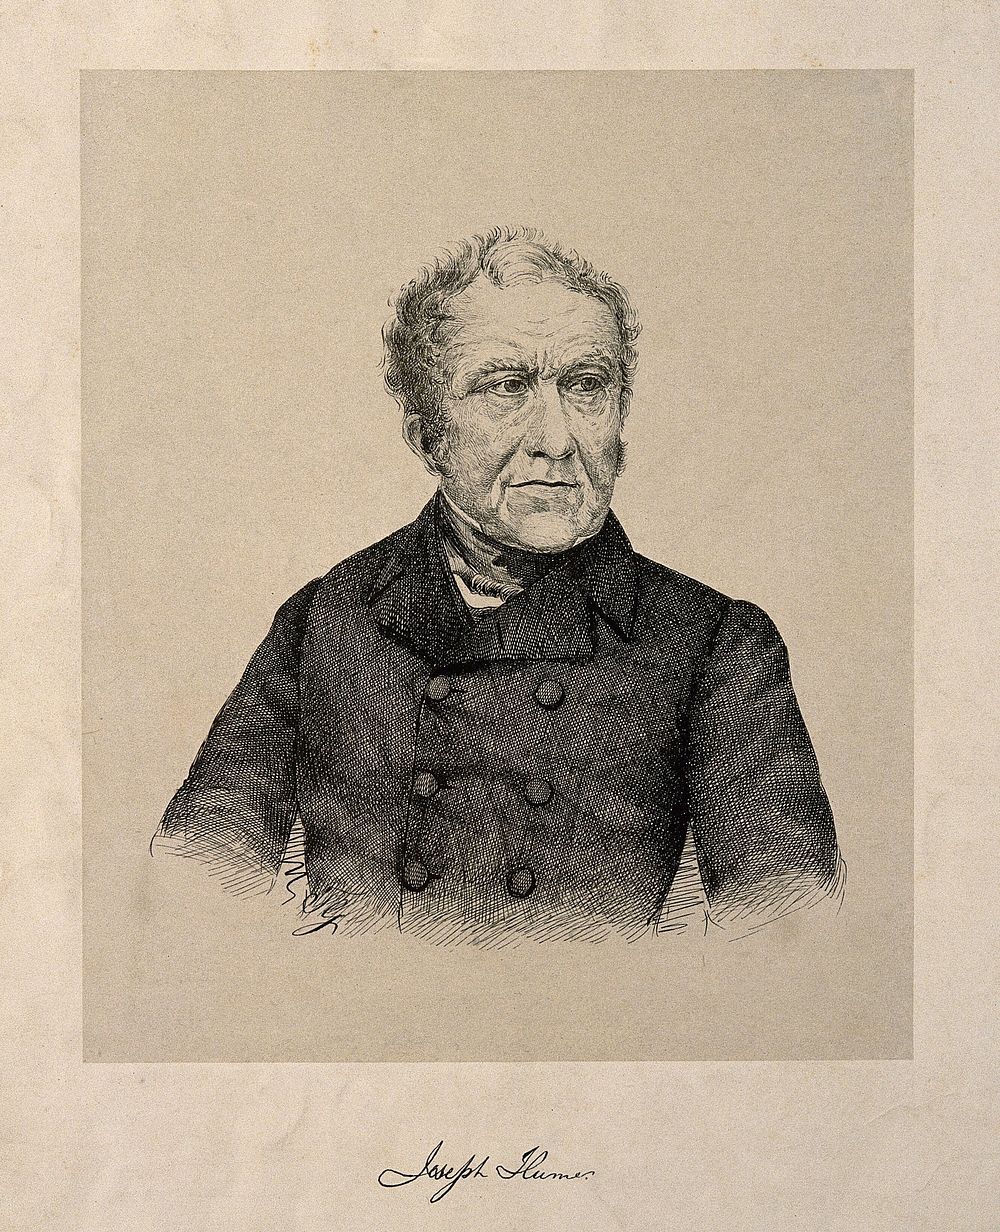 Joseph Hume. Wood engraving by [T. G.], 1855.